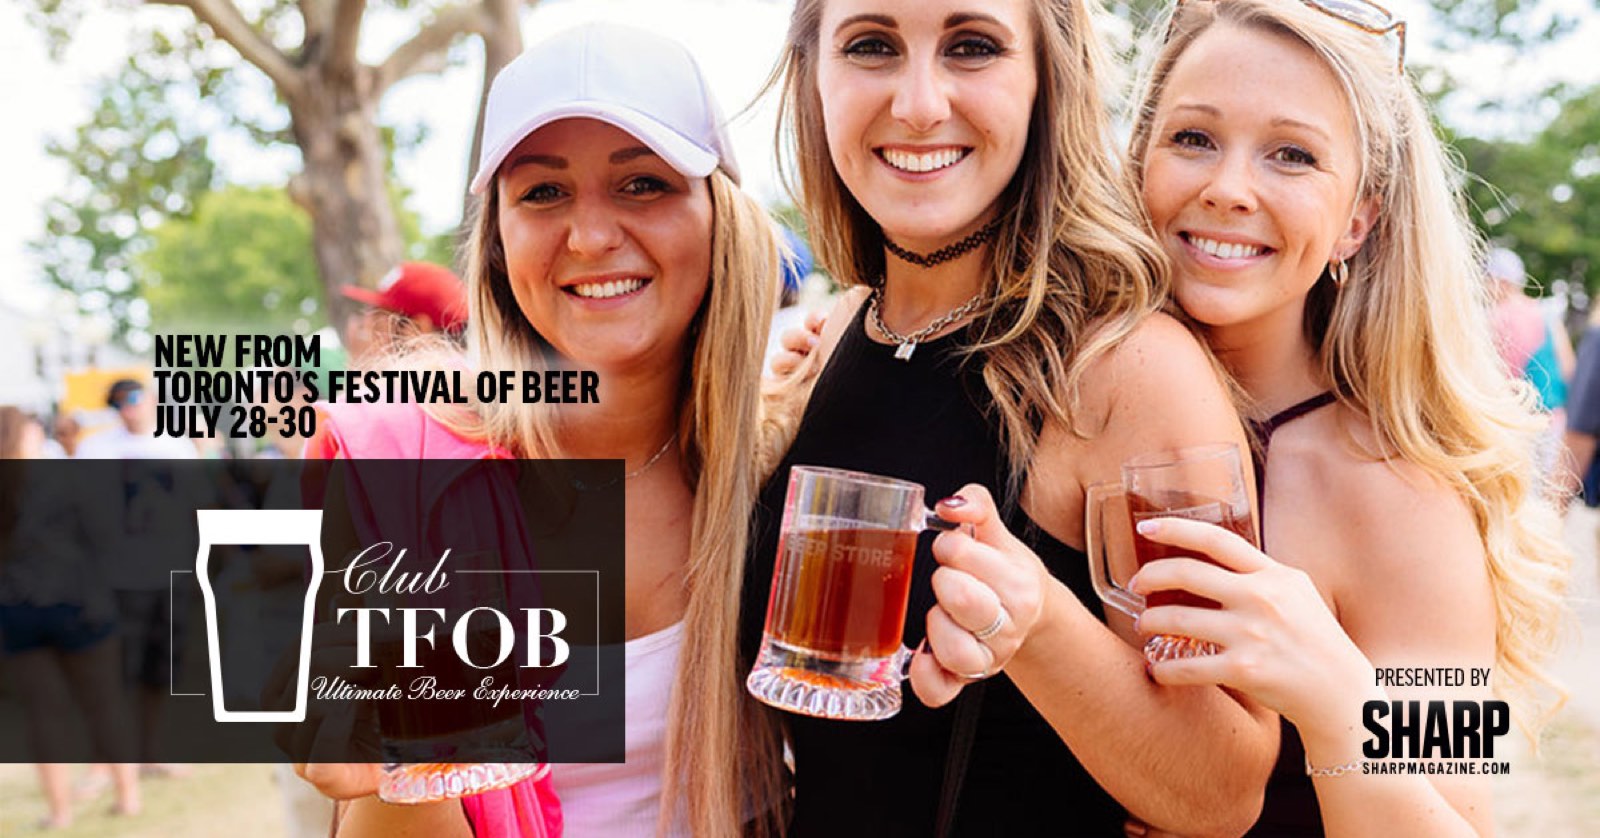 Win Passes to Toronto's Festival of Beer